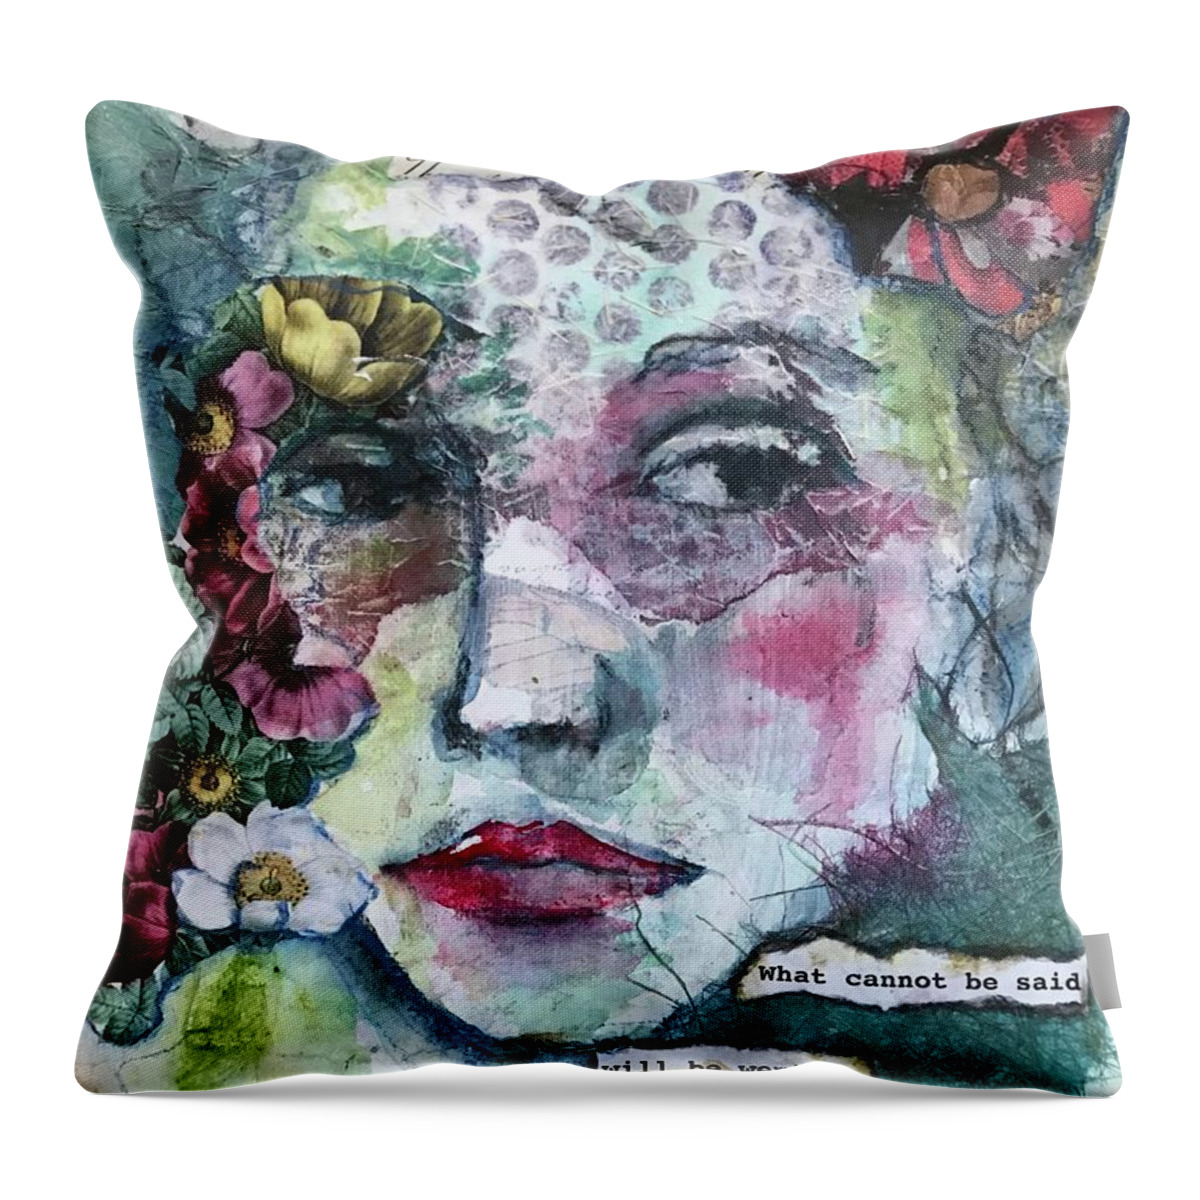 Mixed Media Throw Pillow featuring the painting Sappho's Quote by Diane Fujimoto